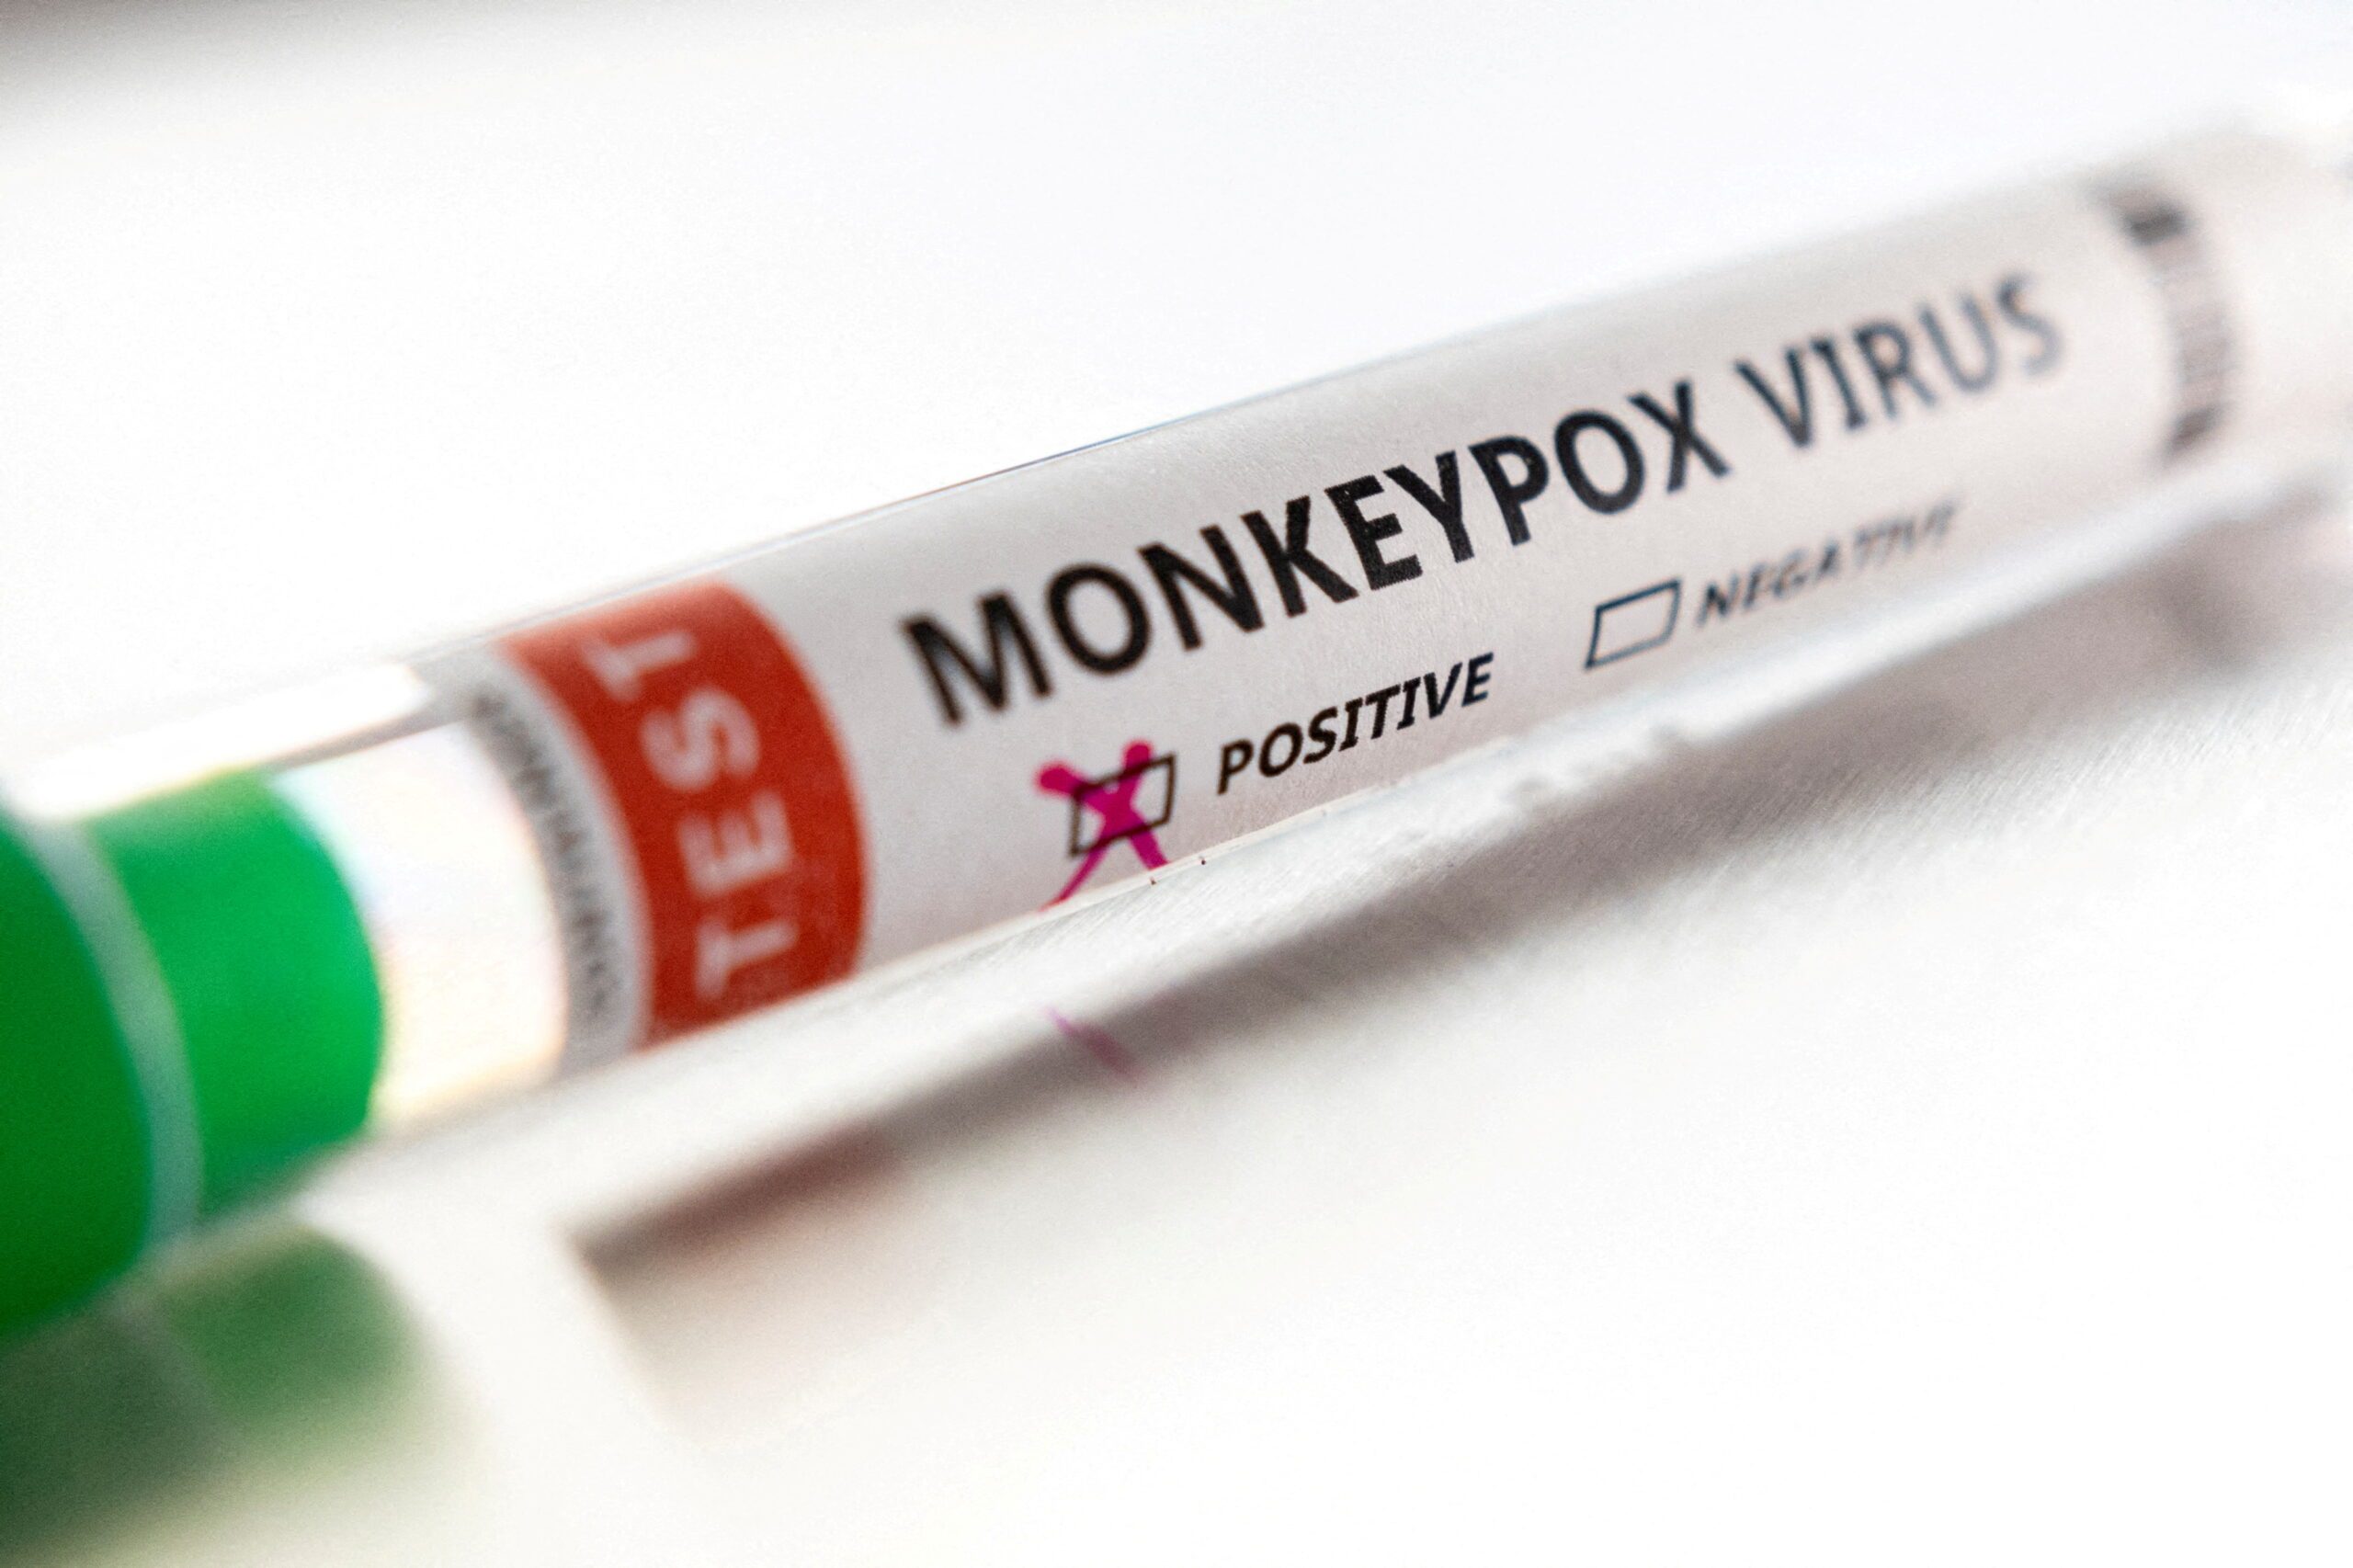 ‘Considerable’ monkeypox transmission happens before symptoms, study suggests